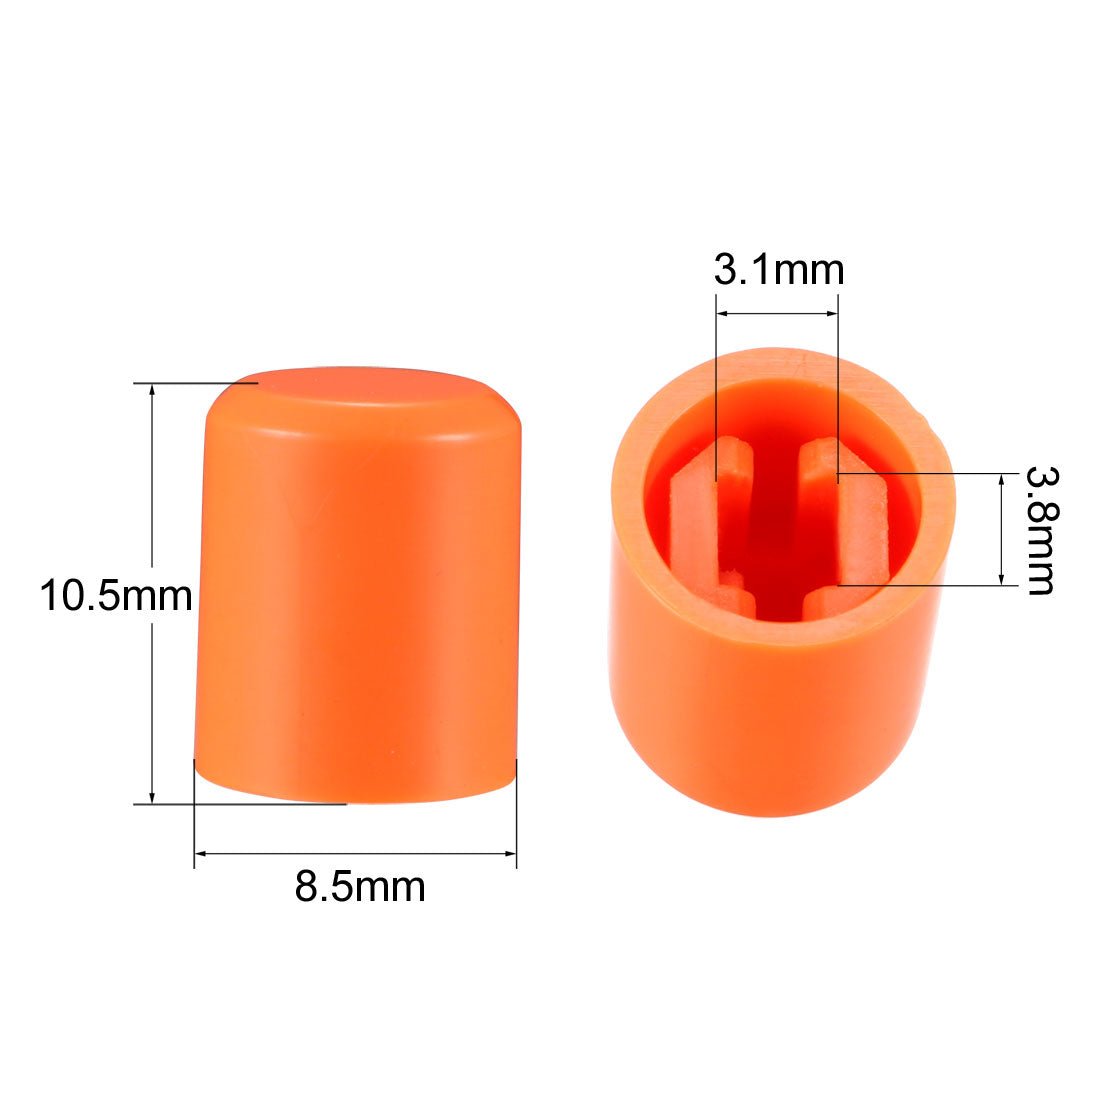 uxcell Uxcell 20Pcs 3.1mm Hole Dia Plastic Push Button Tactile Switch Caps Cover Keycaps Protector Orange for 6x6 Tact Switch